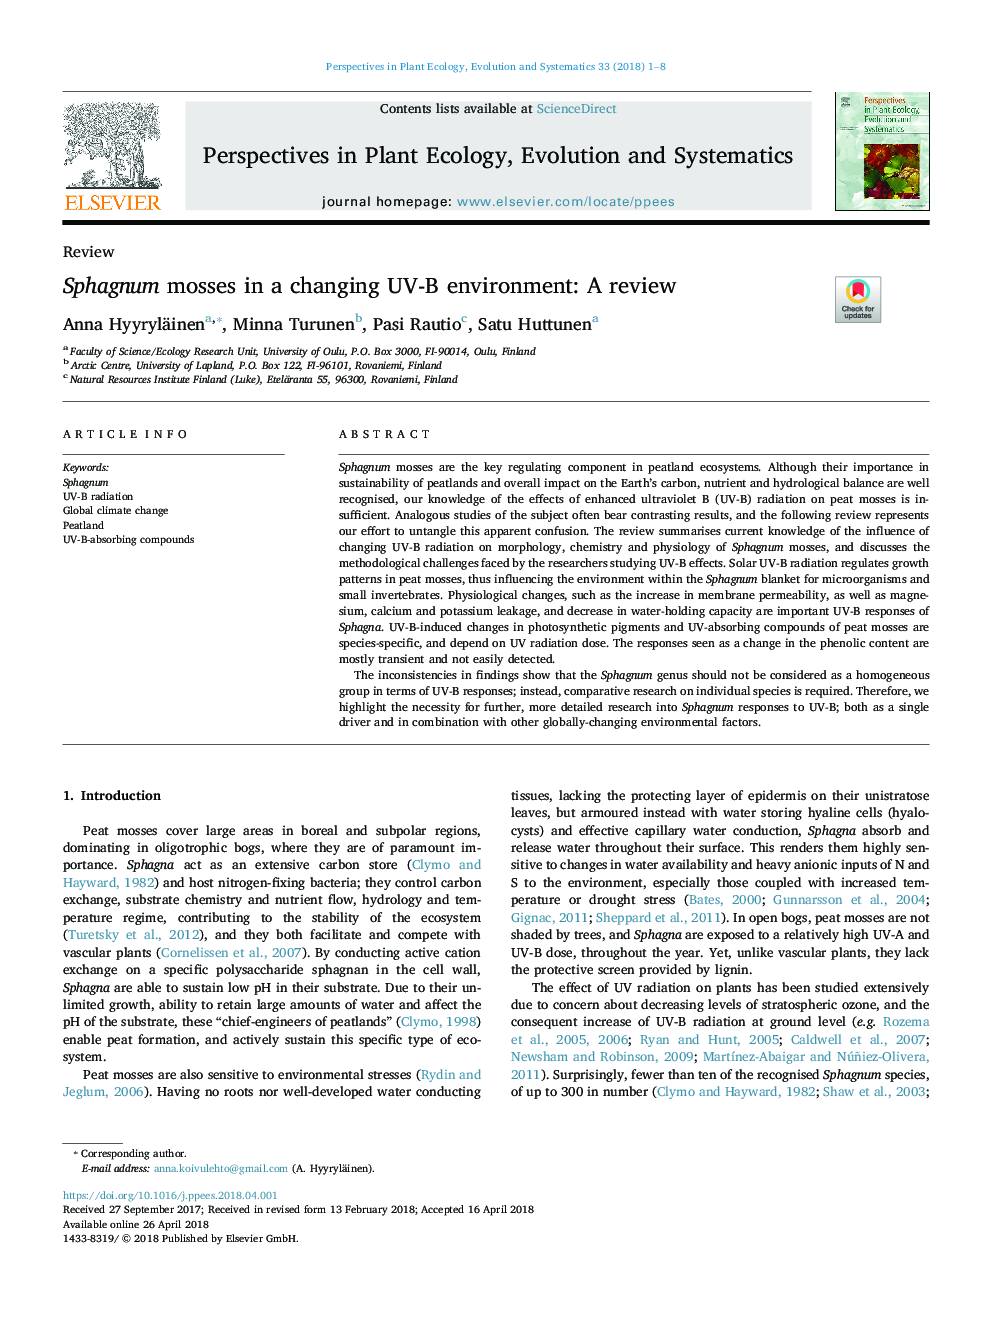 Sphagnum mosses in a changing UV-B environment: A review